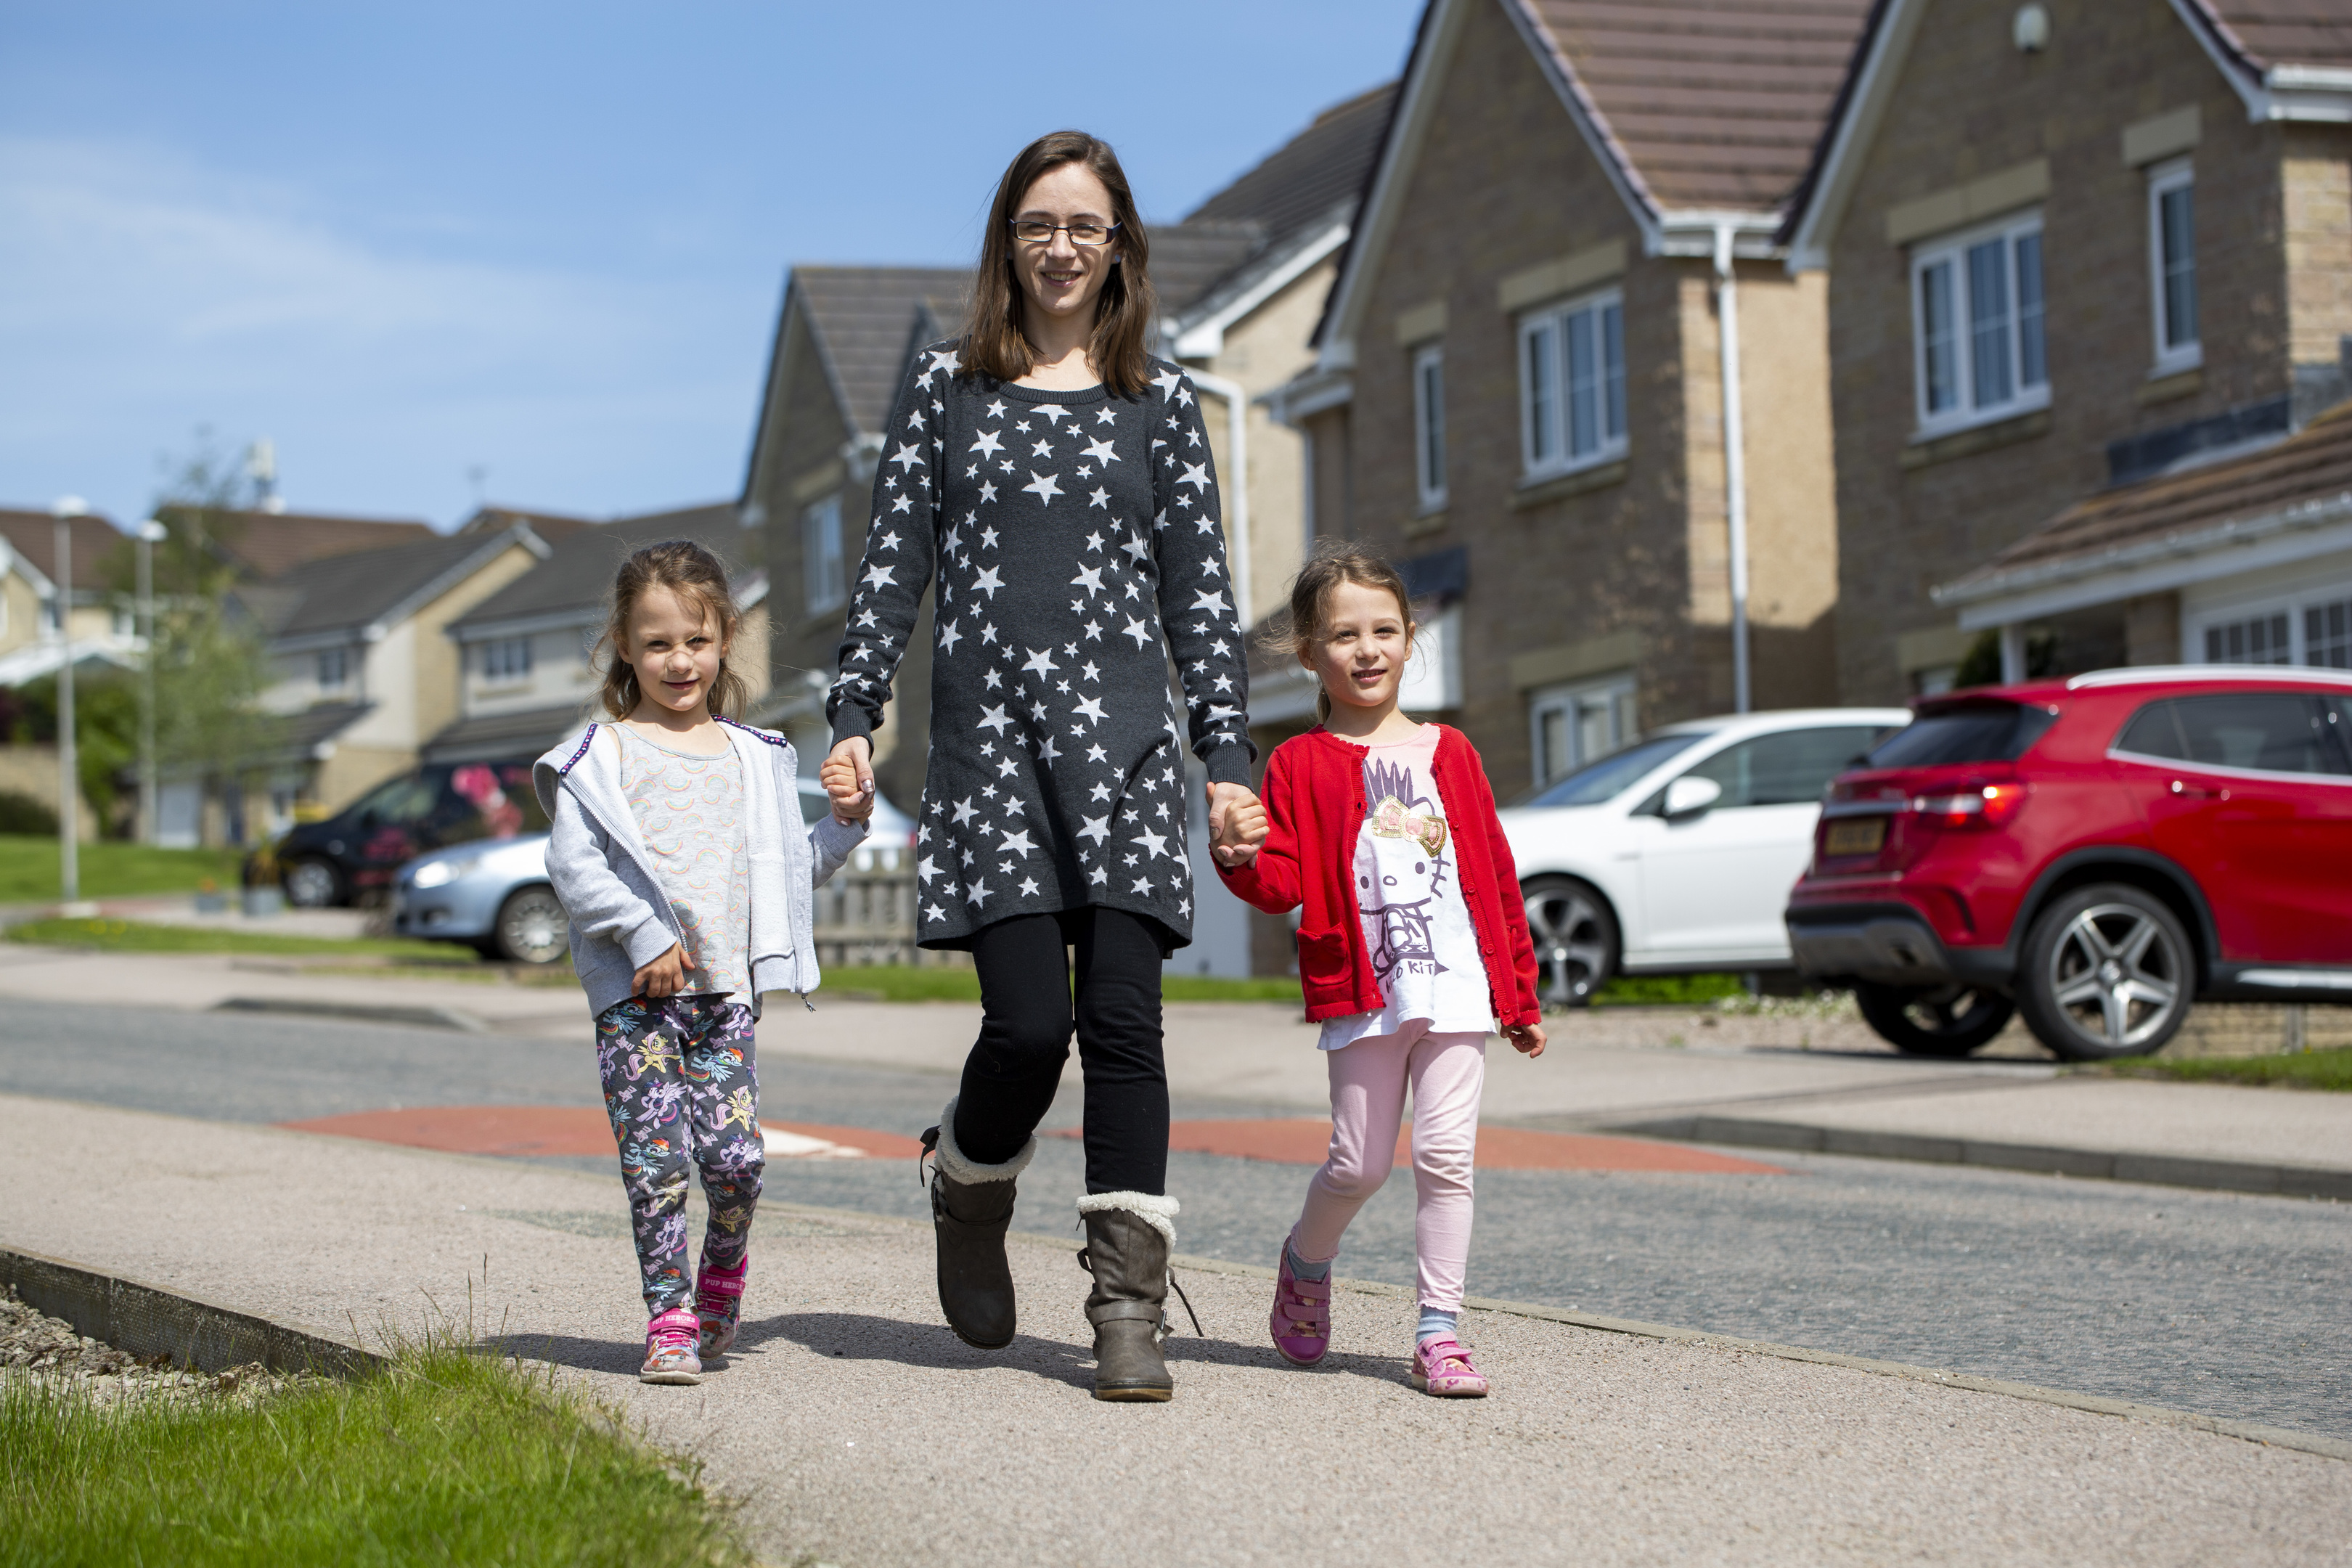 Pictured: Amy Taylor, with “Miracle Twins” Gaia & Luna (red top) Taylor (age 5).

Photo: Ross Johnston/Newsline Media.